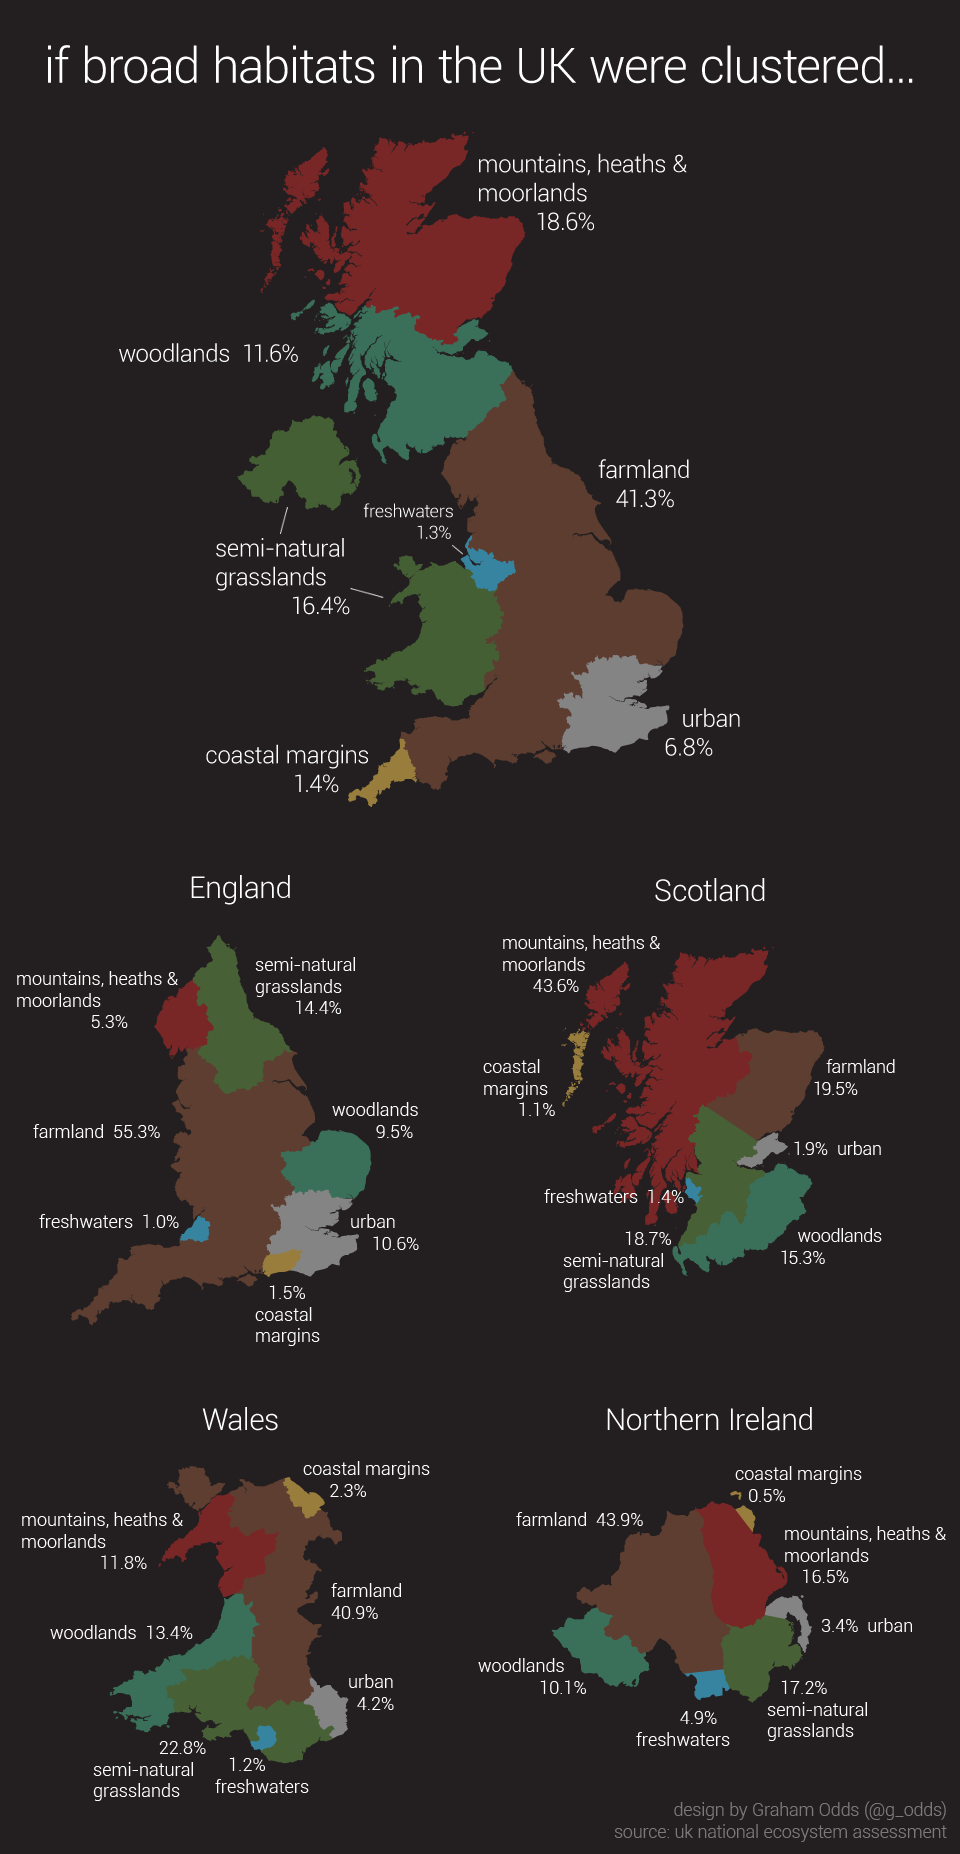 If broad habitats in the UK were clustered...